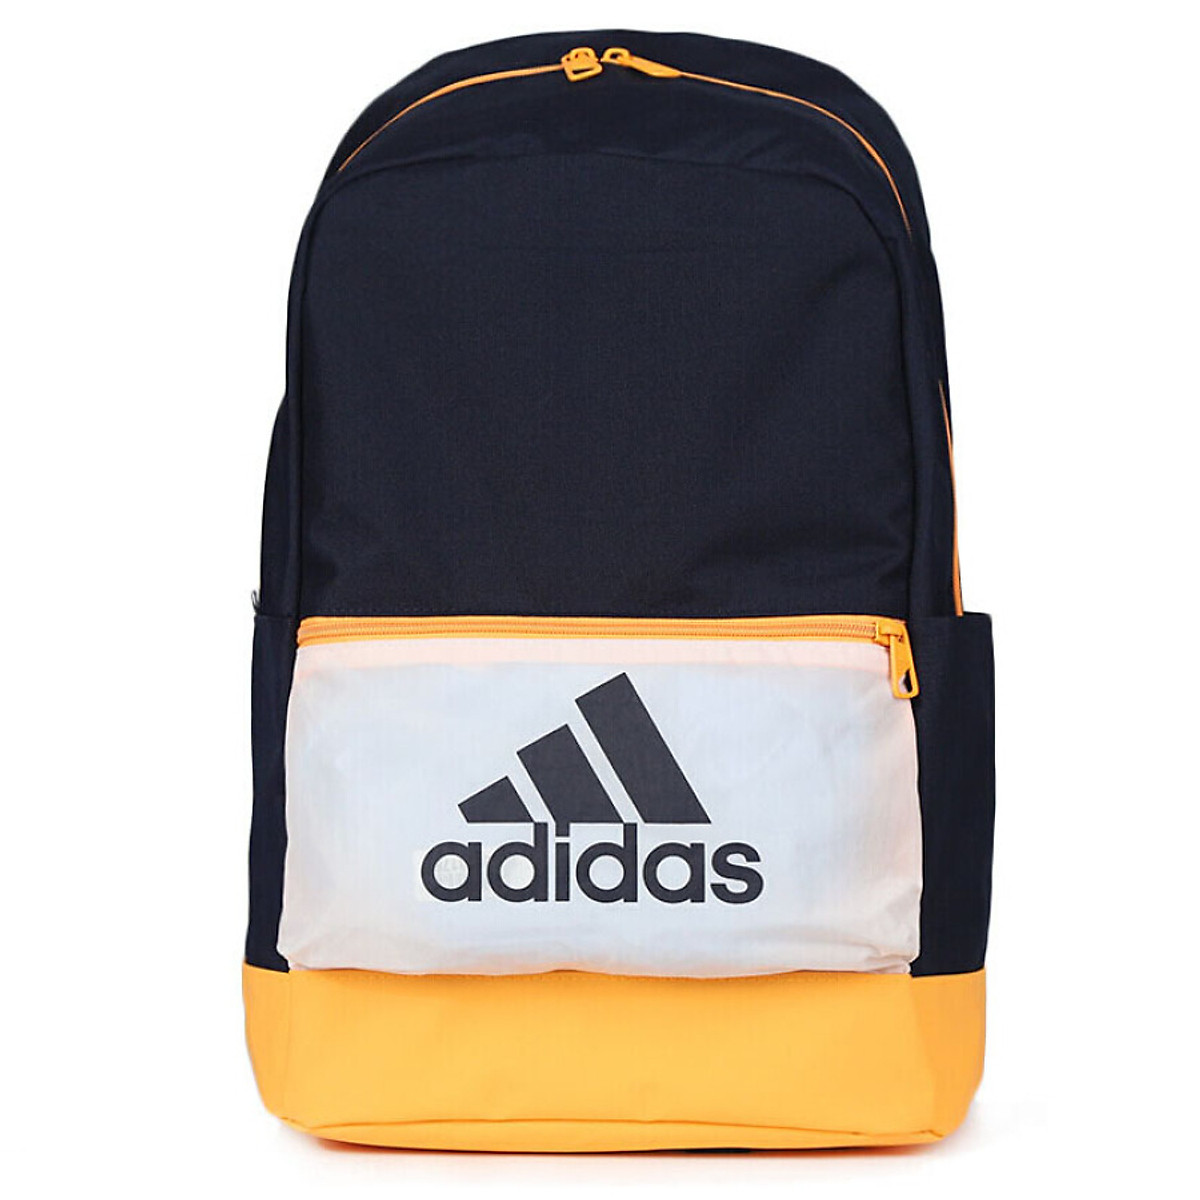 Mua Adidas ADIDAS backpack men and women bag CLAS BP BOS sports and leisure  travel student bag backpack DZ8269 NS | Tiki